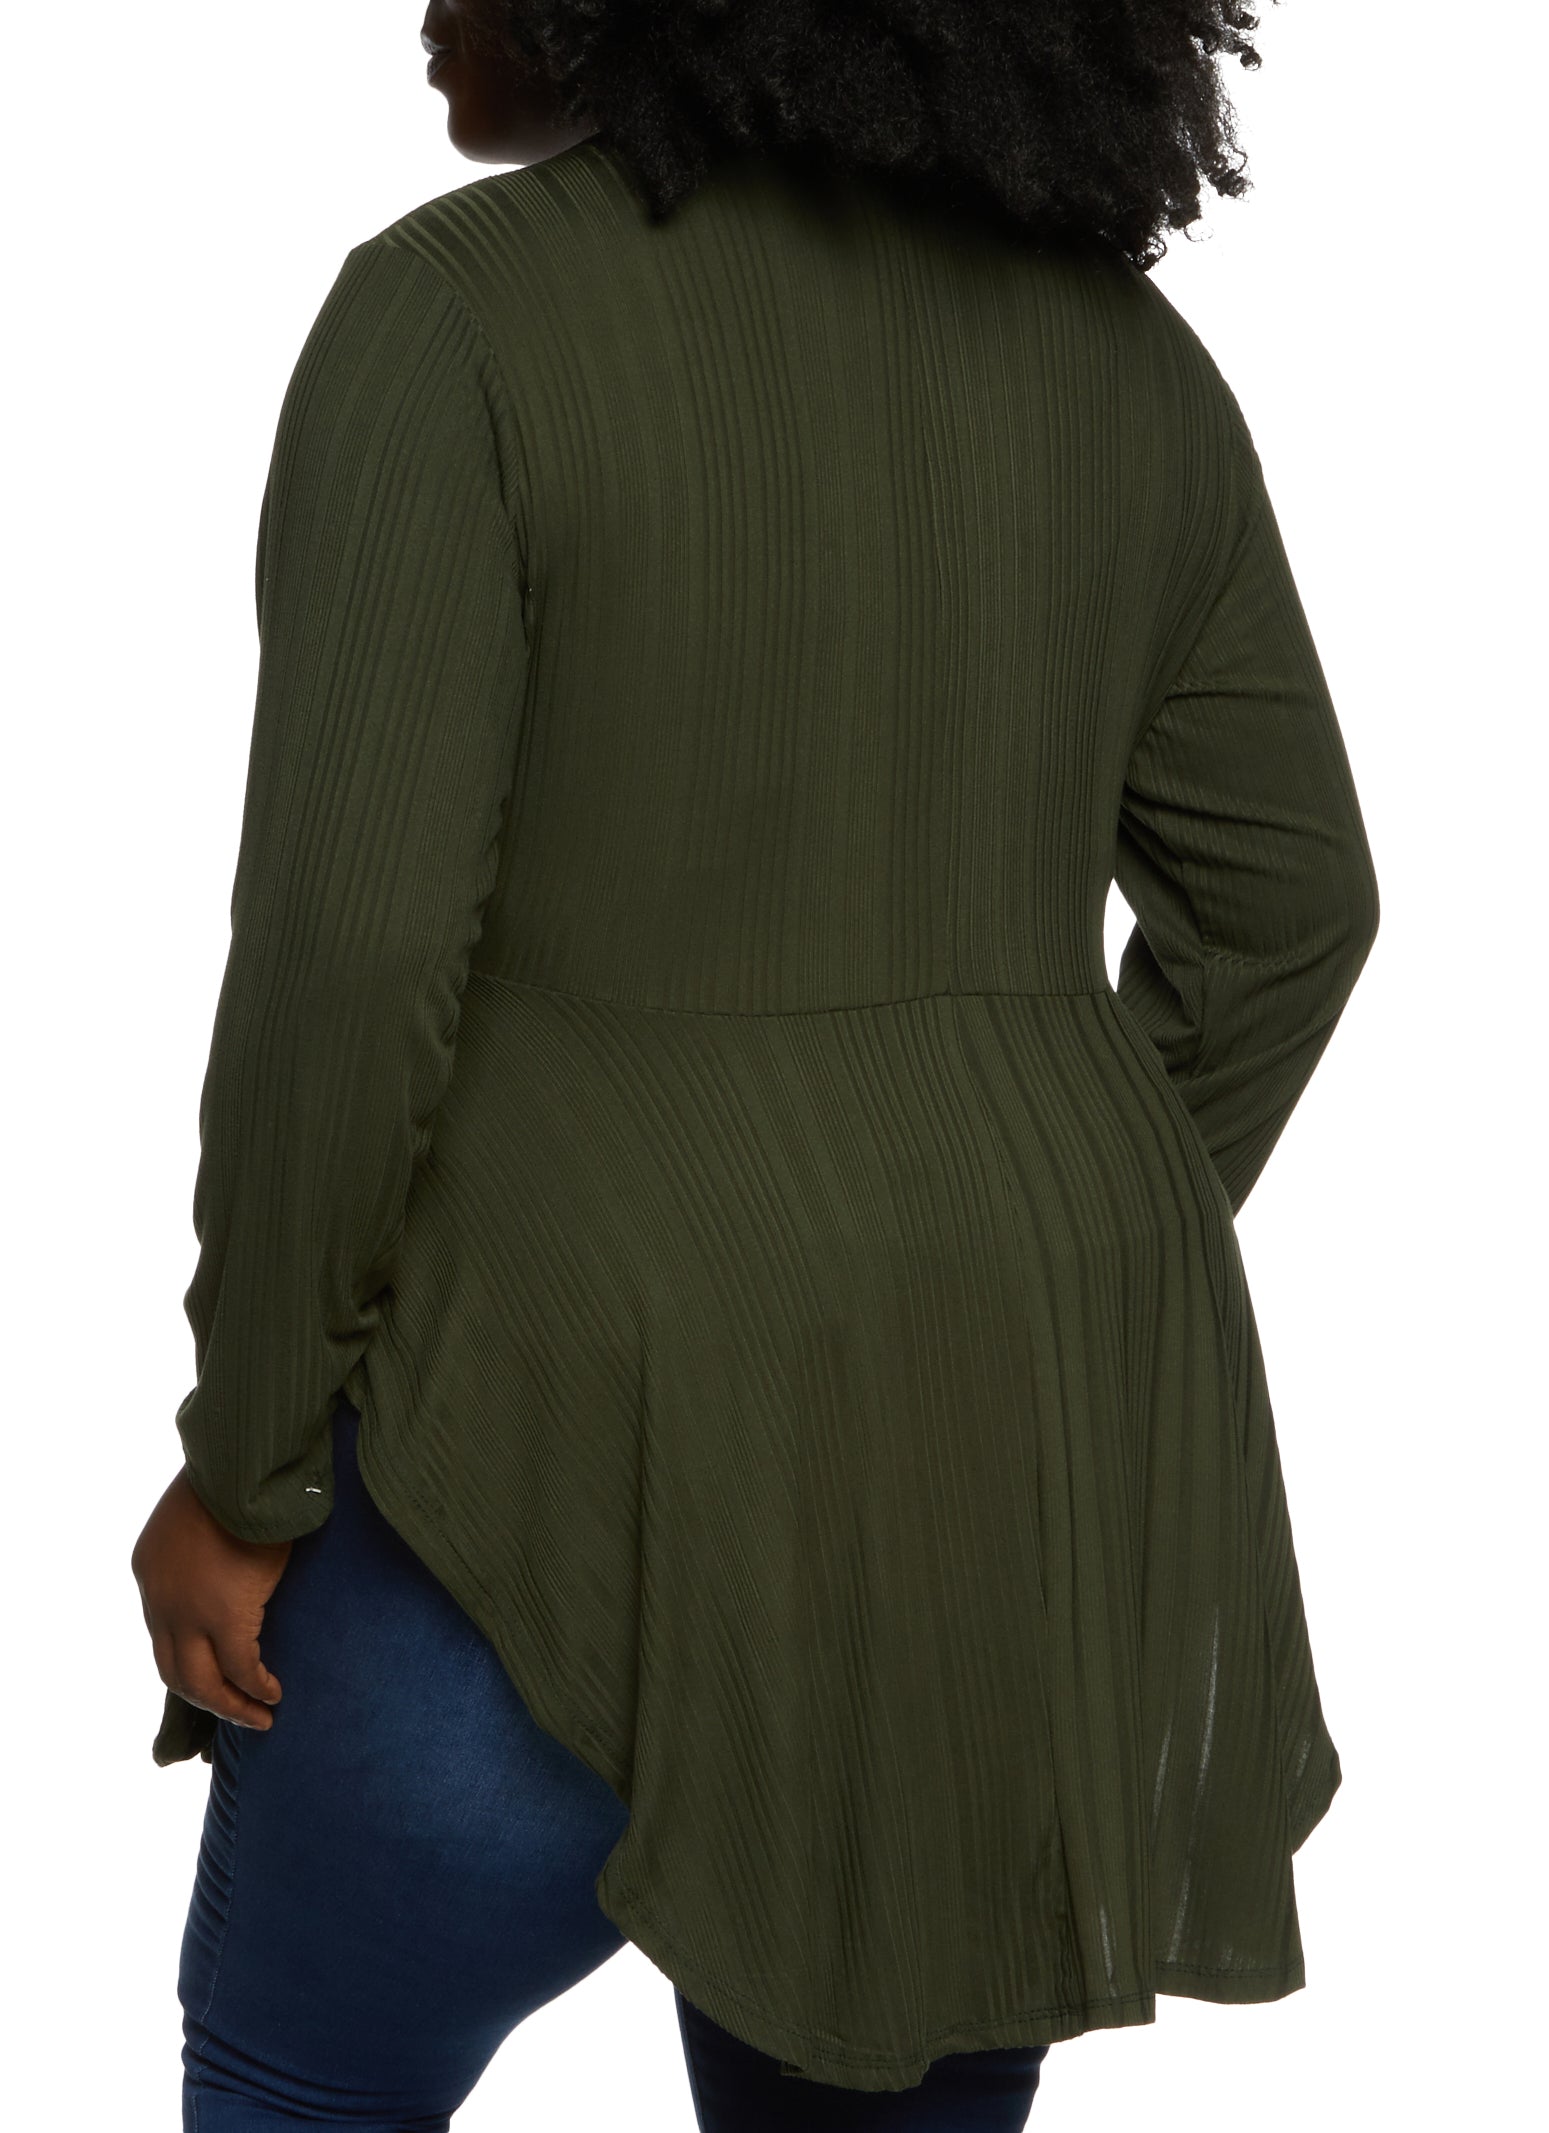 Plus Size Long Sleeve Peplum Top with Necklace